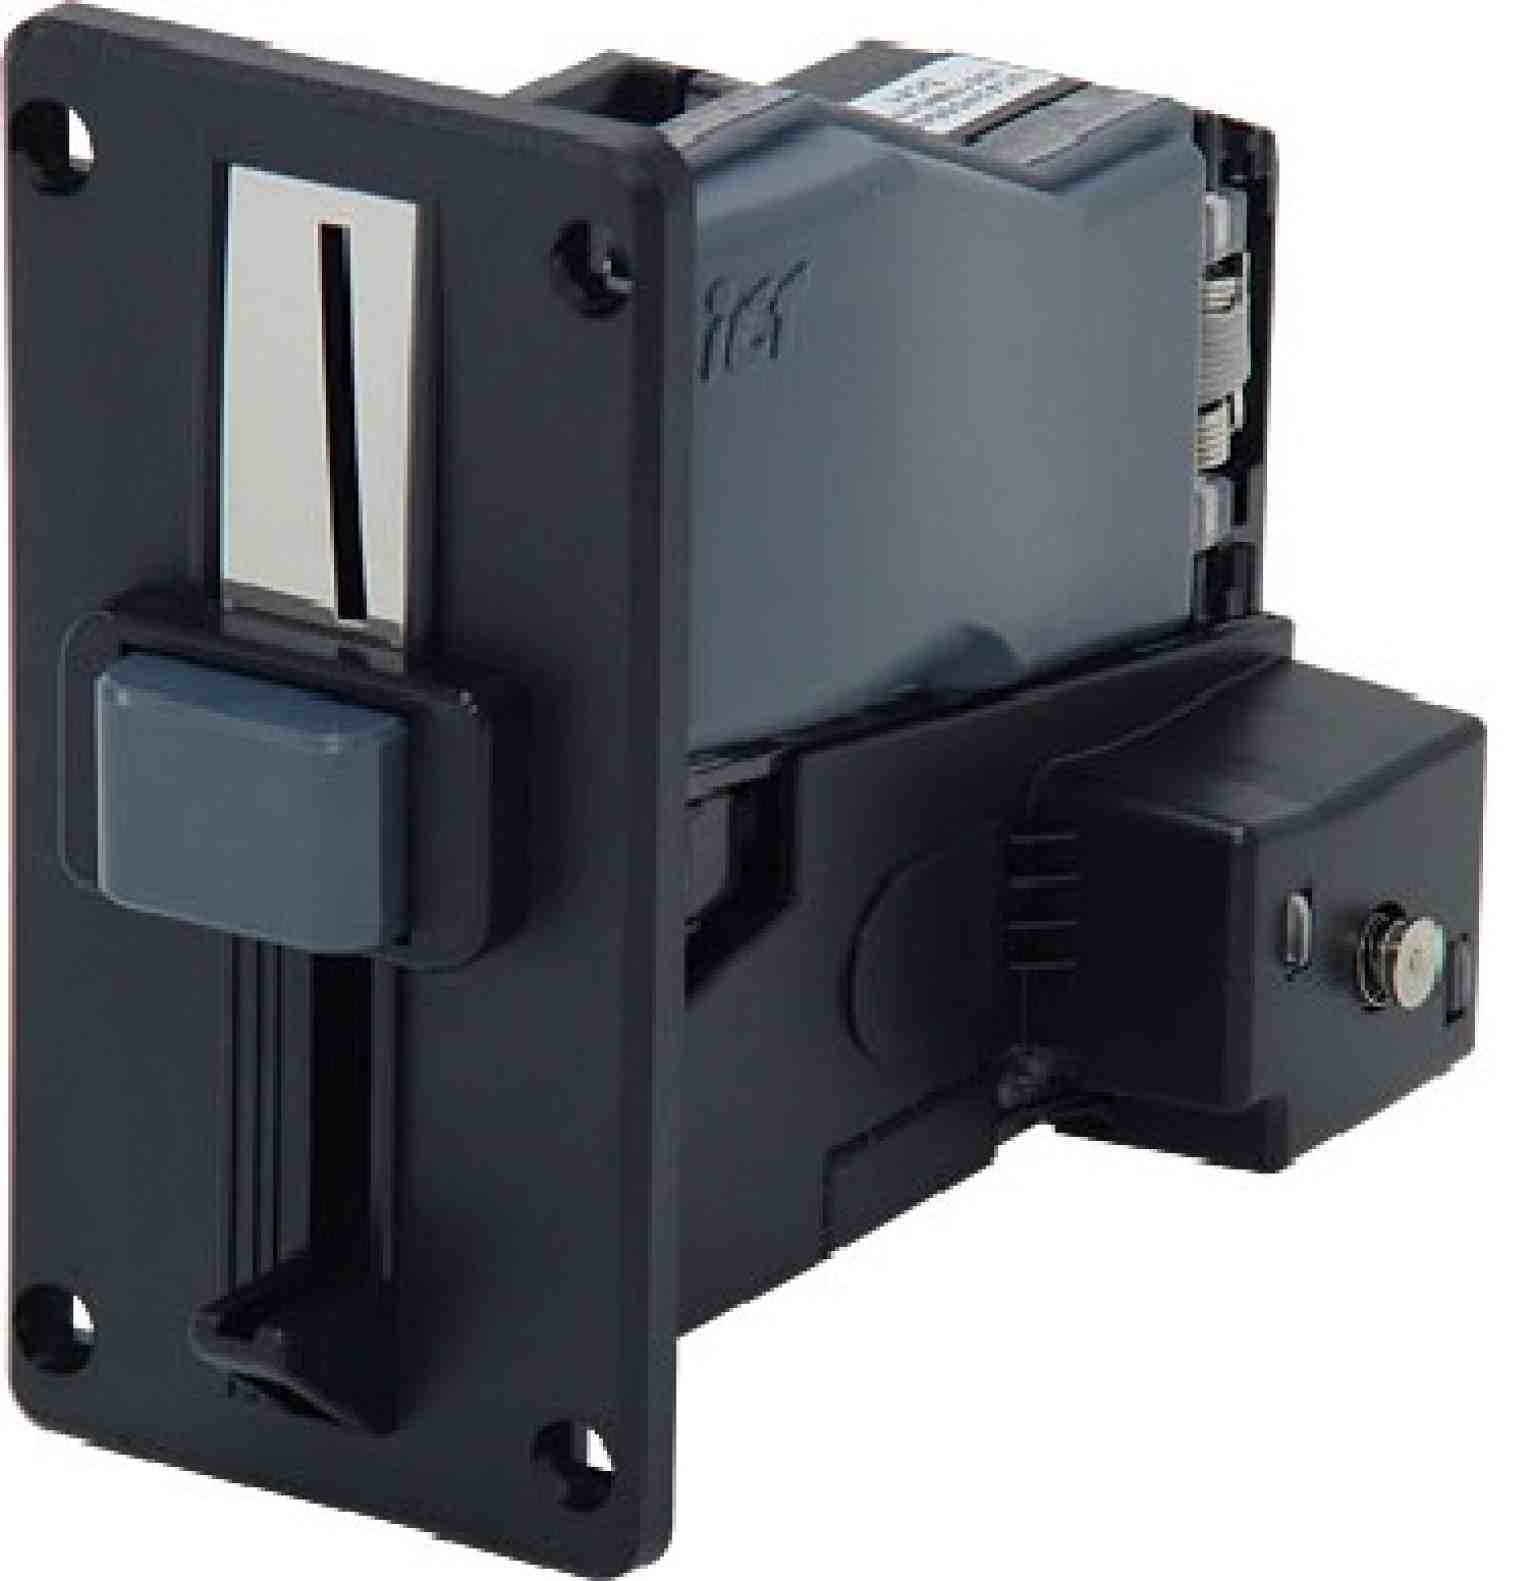  ICT UCAES Coin Acceptor